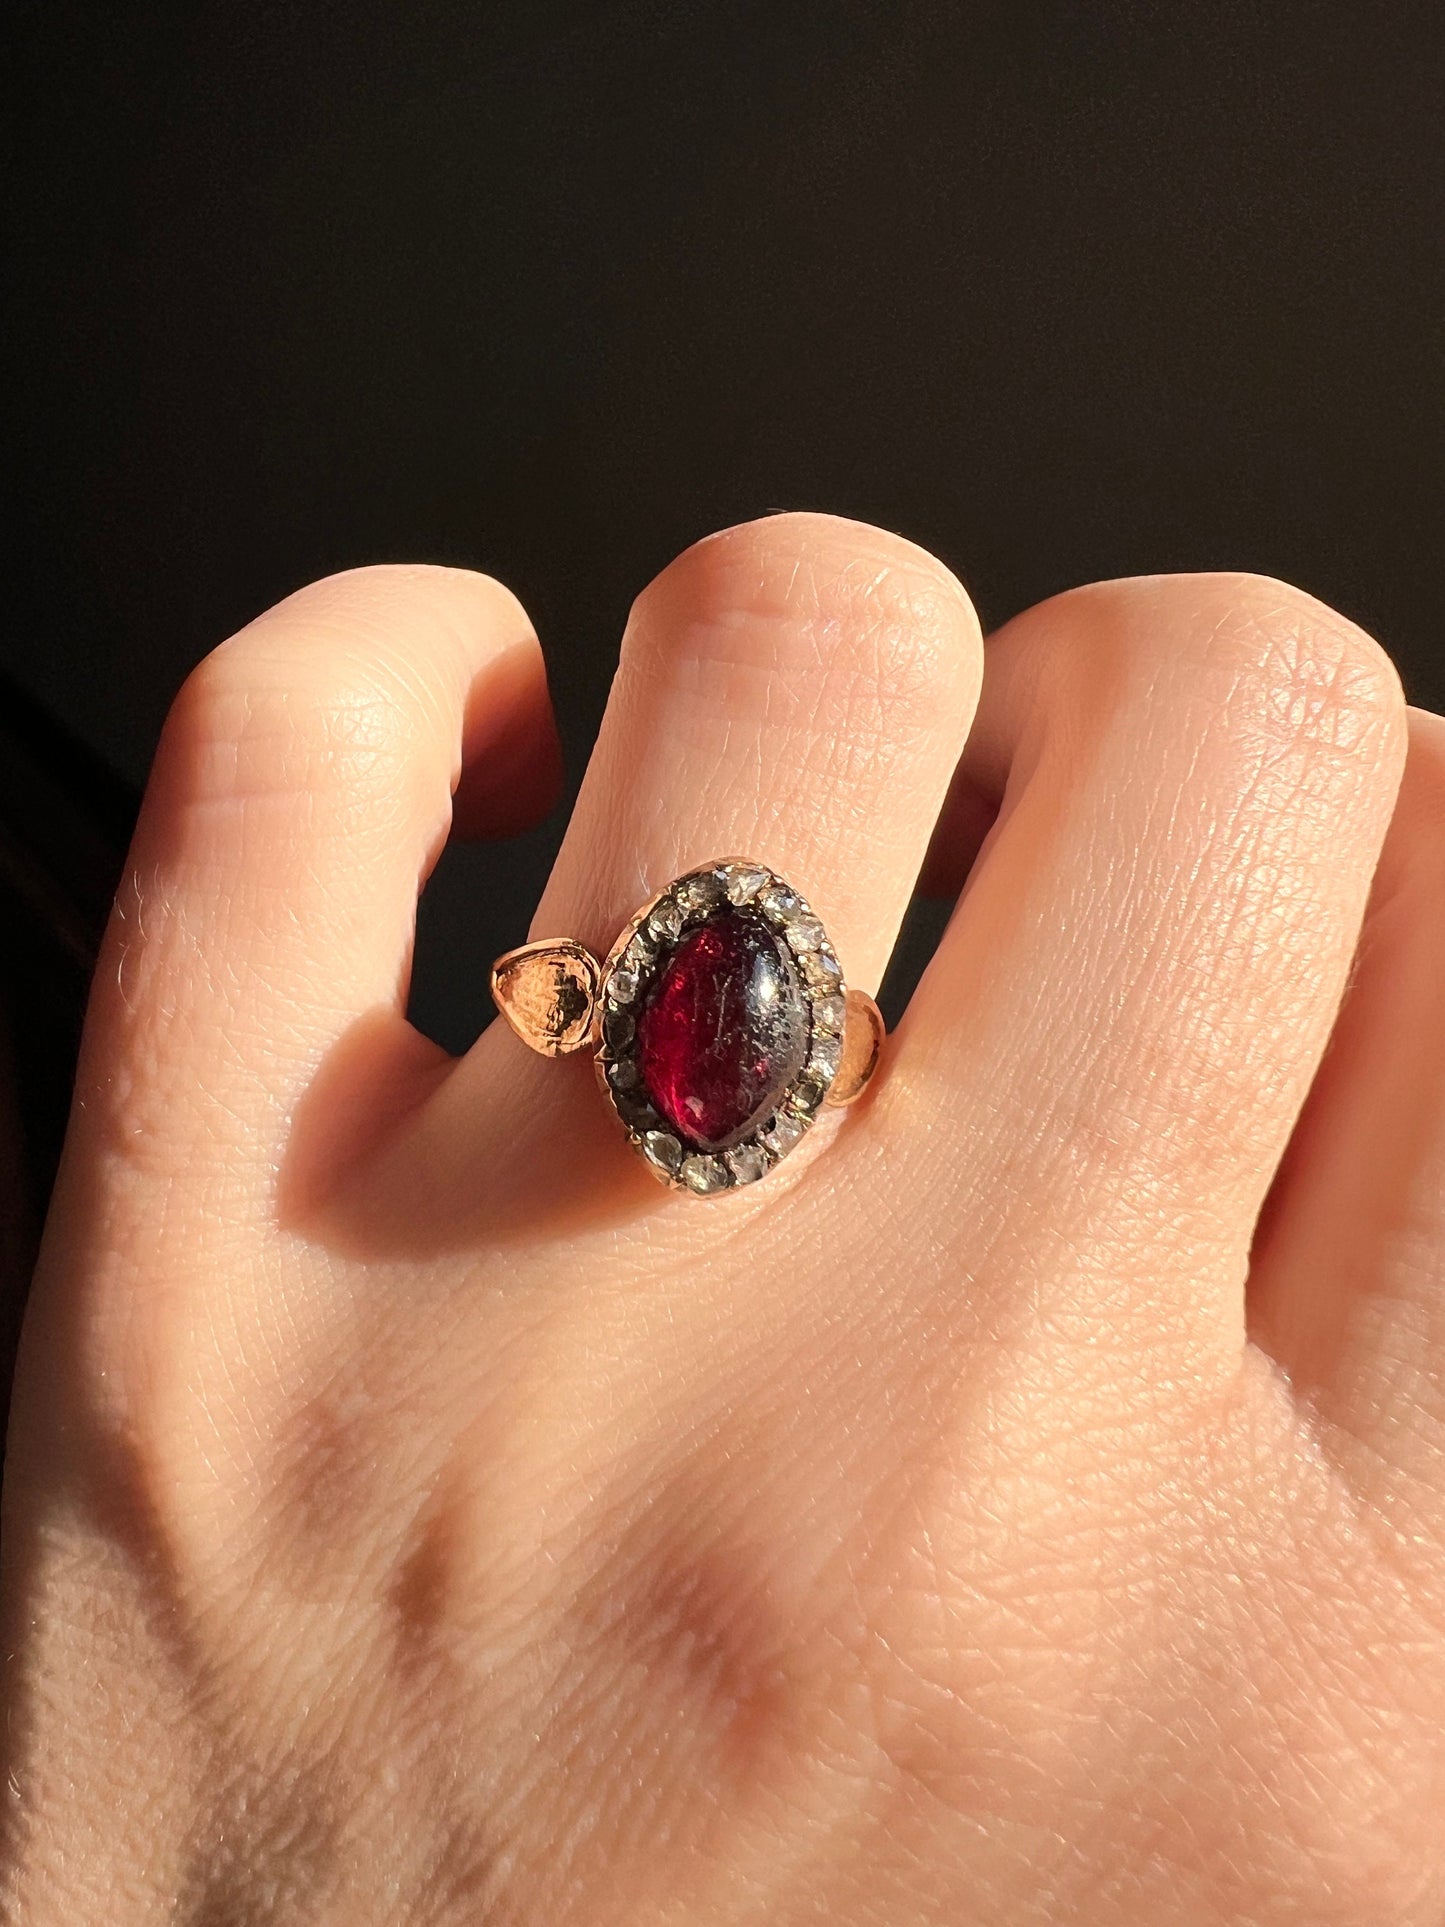 Glowing Cabochon Red GARNET Rose Cut Diamond Halo Ring French Antique 14k Gold Georgian Victorian Juicy Oval Berry Red Pink Romantic Gift